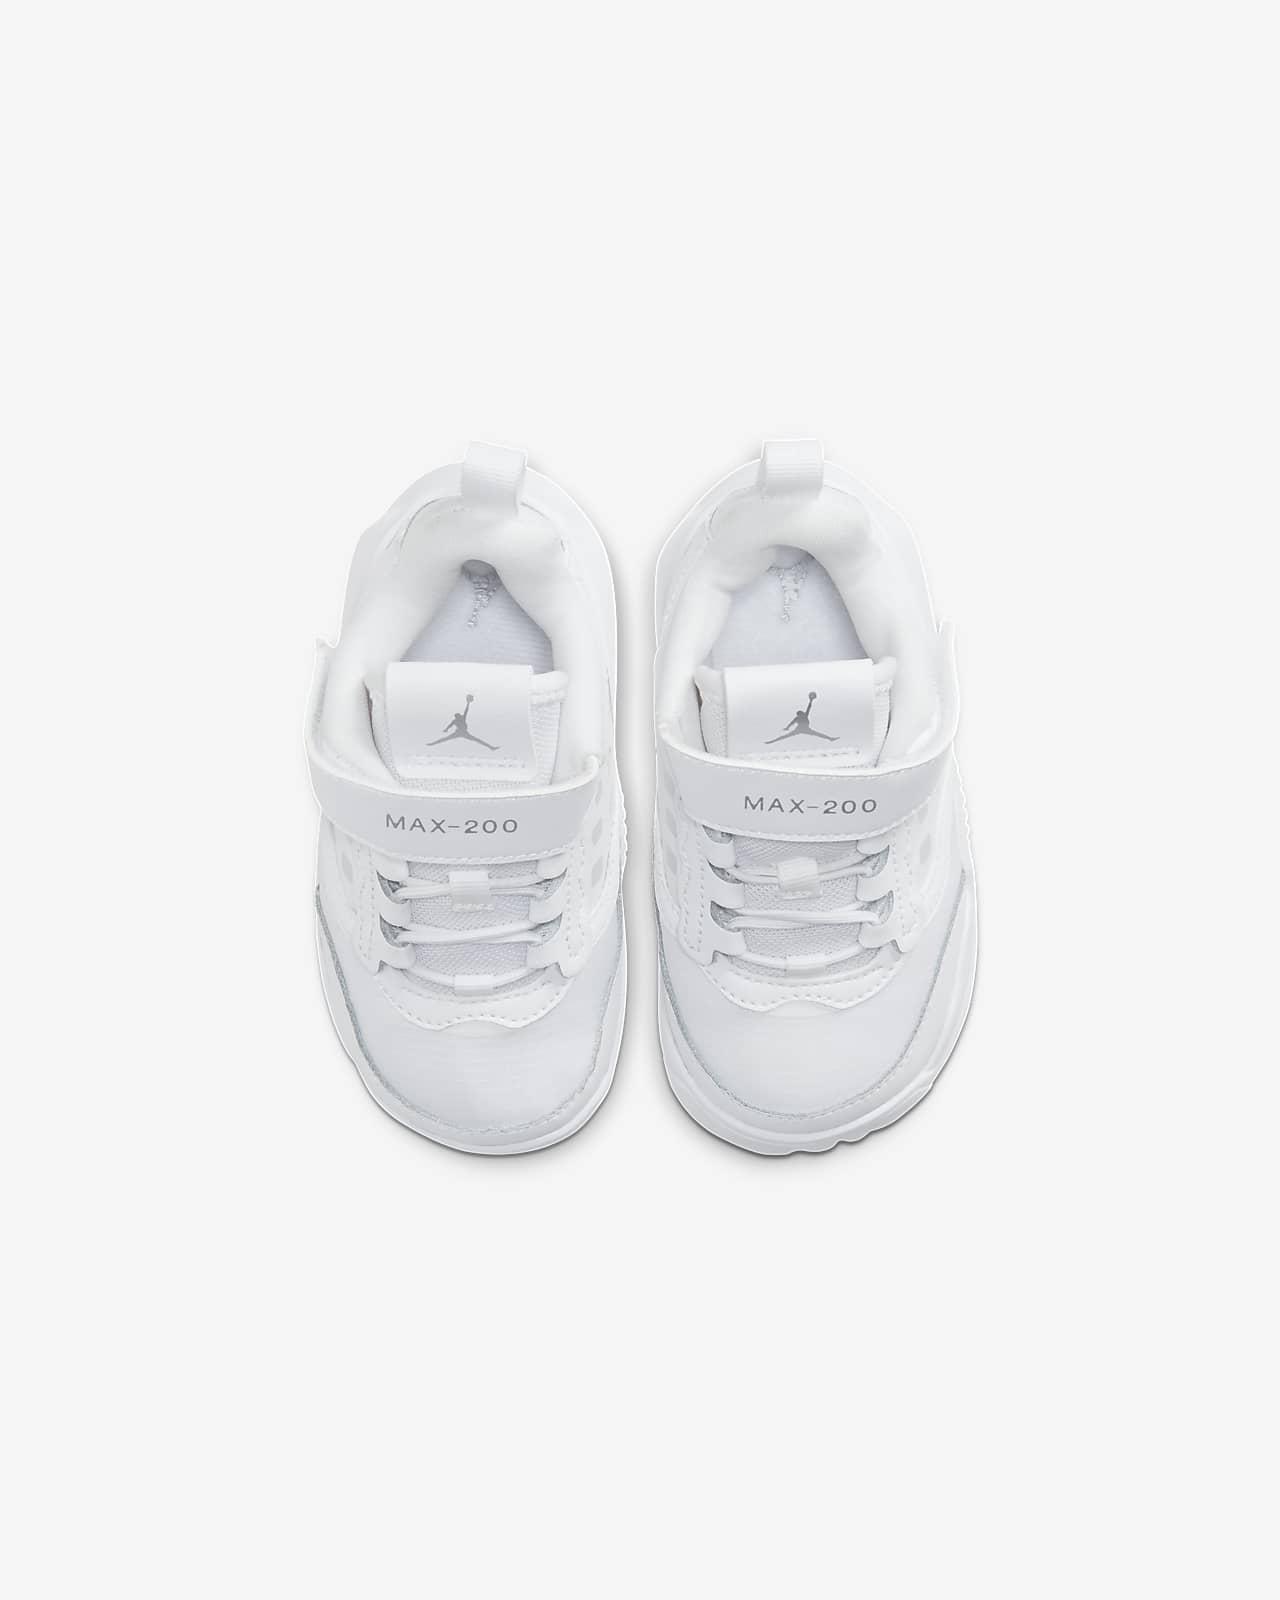 baby gear shoes